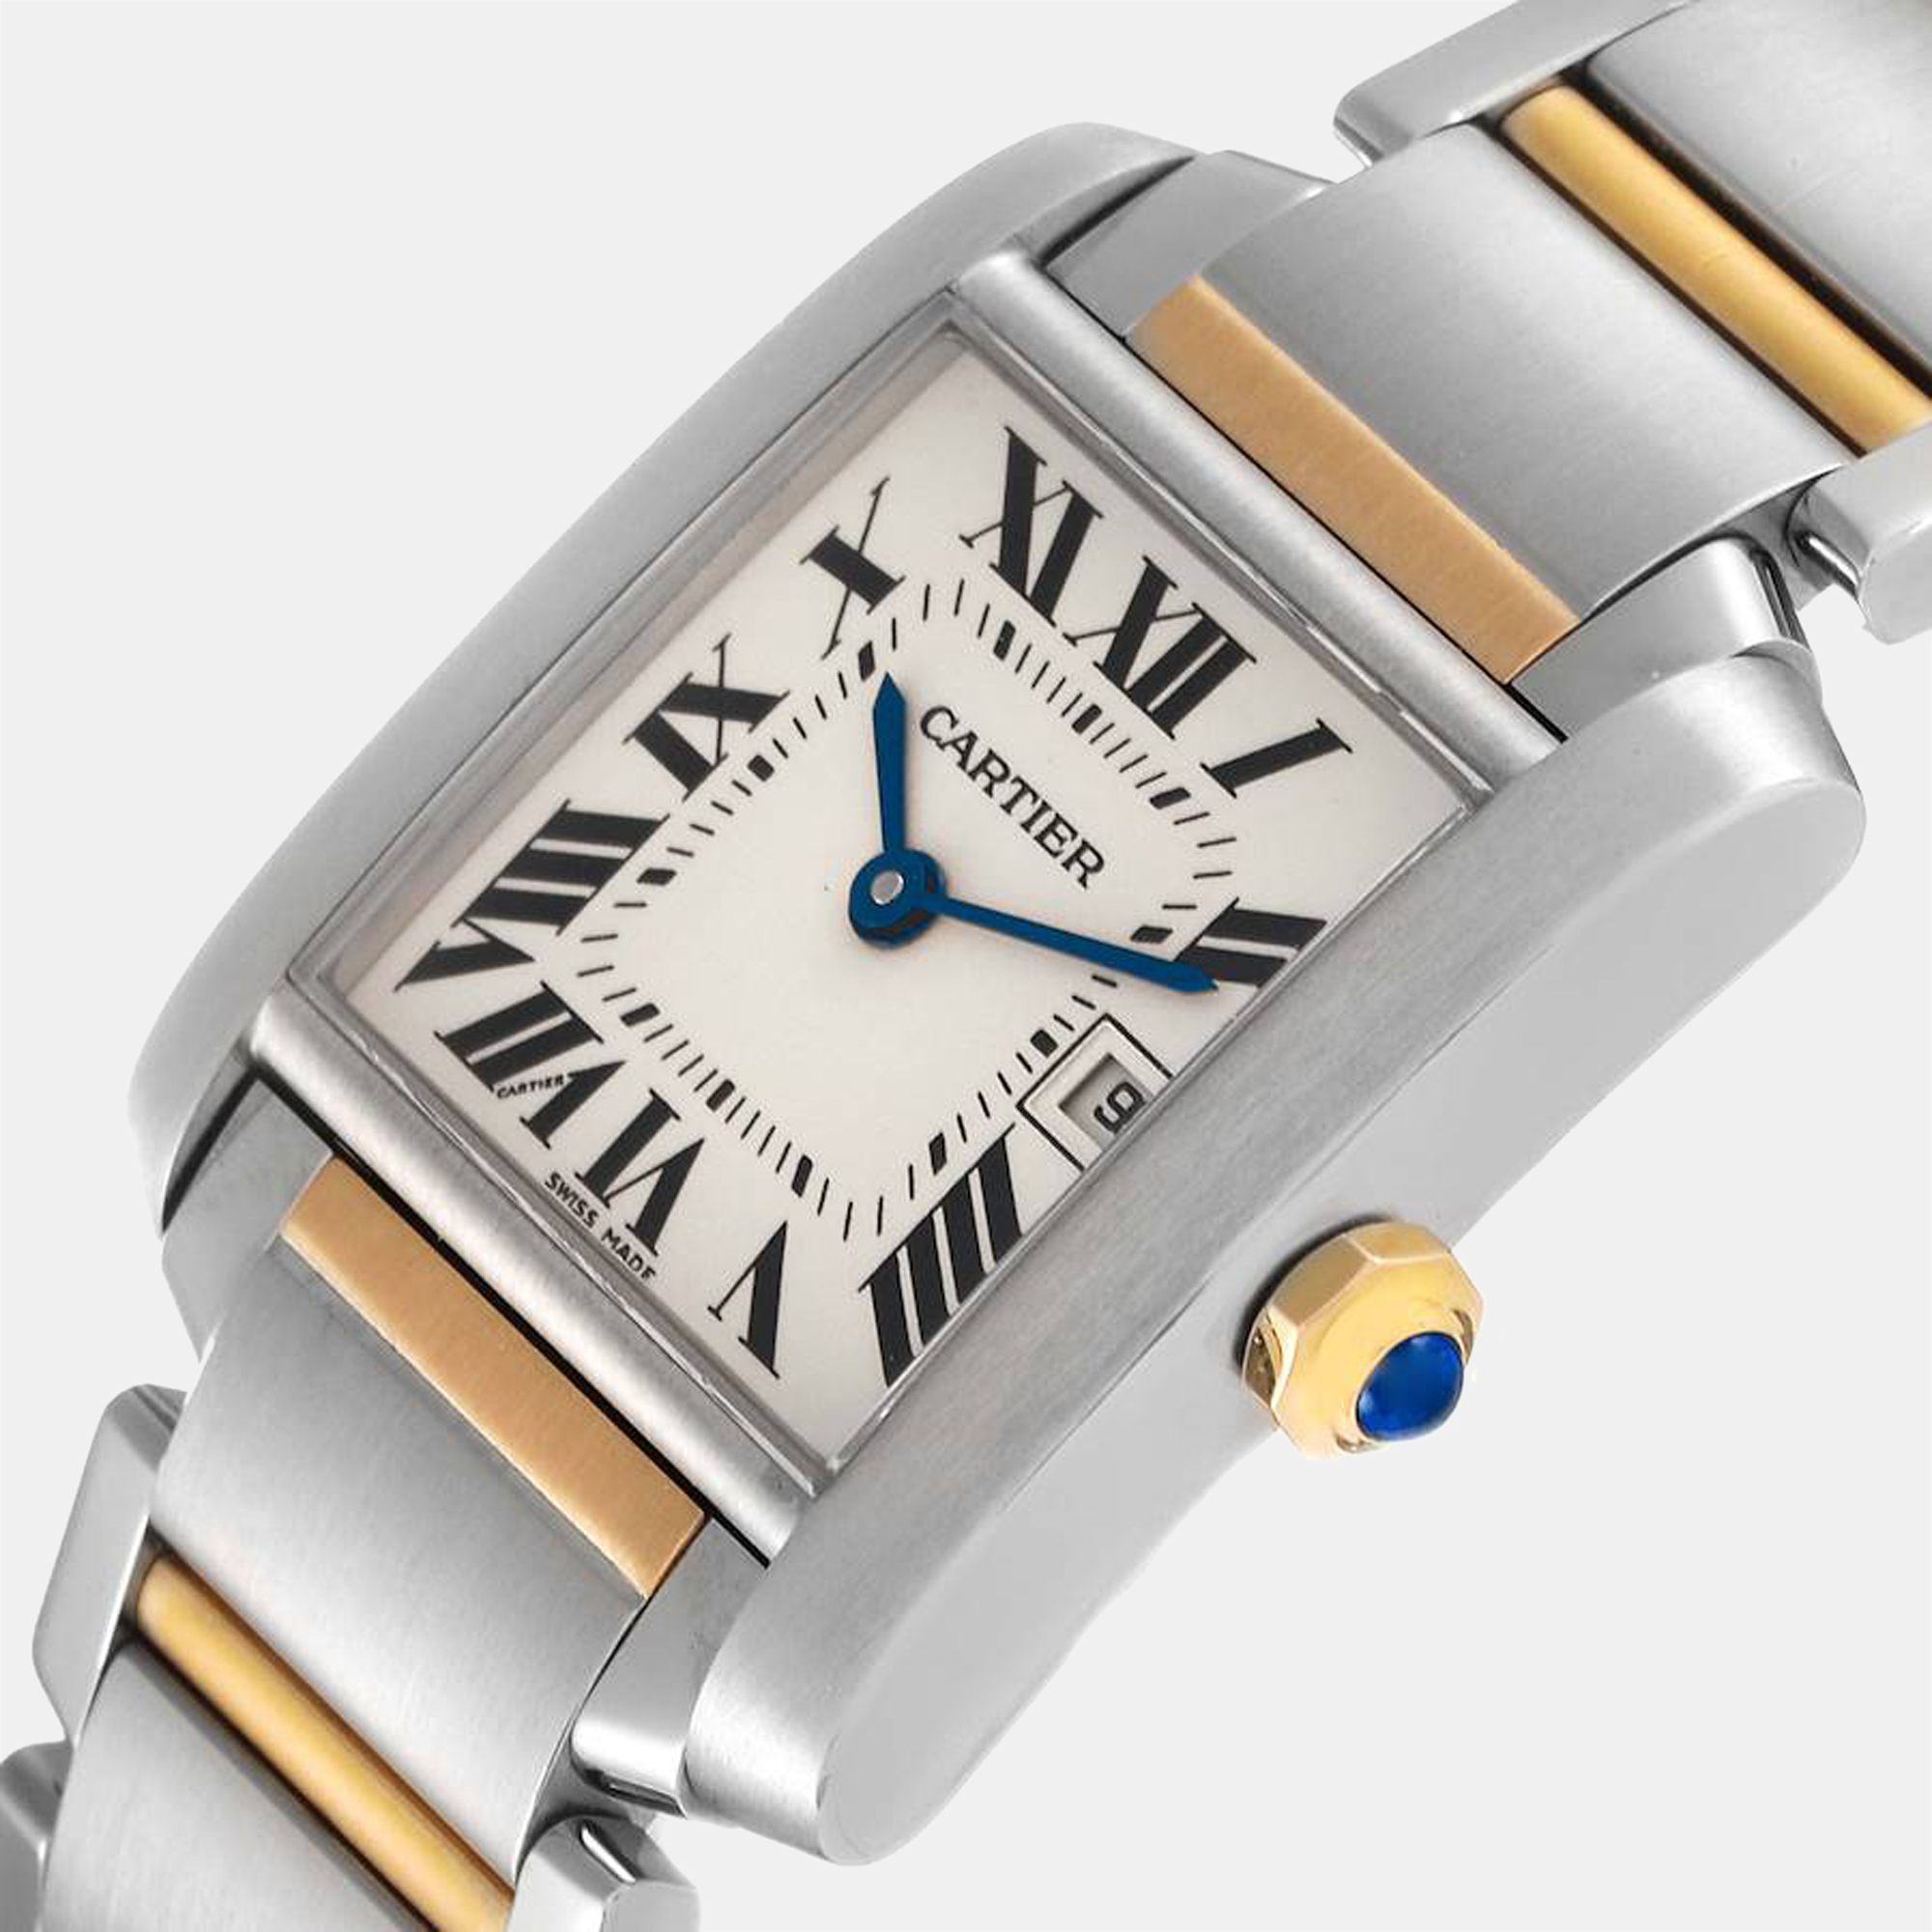 

Cartier Silver 18k Yellow Gold And Stainless Steel Tank Francaise W51012Q4 Quartz Women's Wristwatch 25 mm